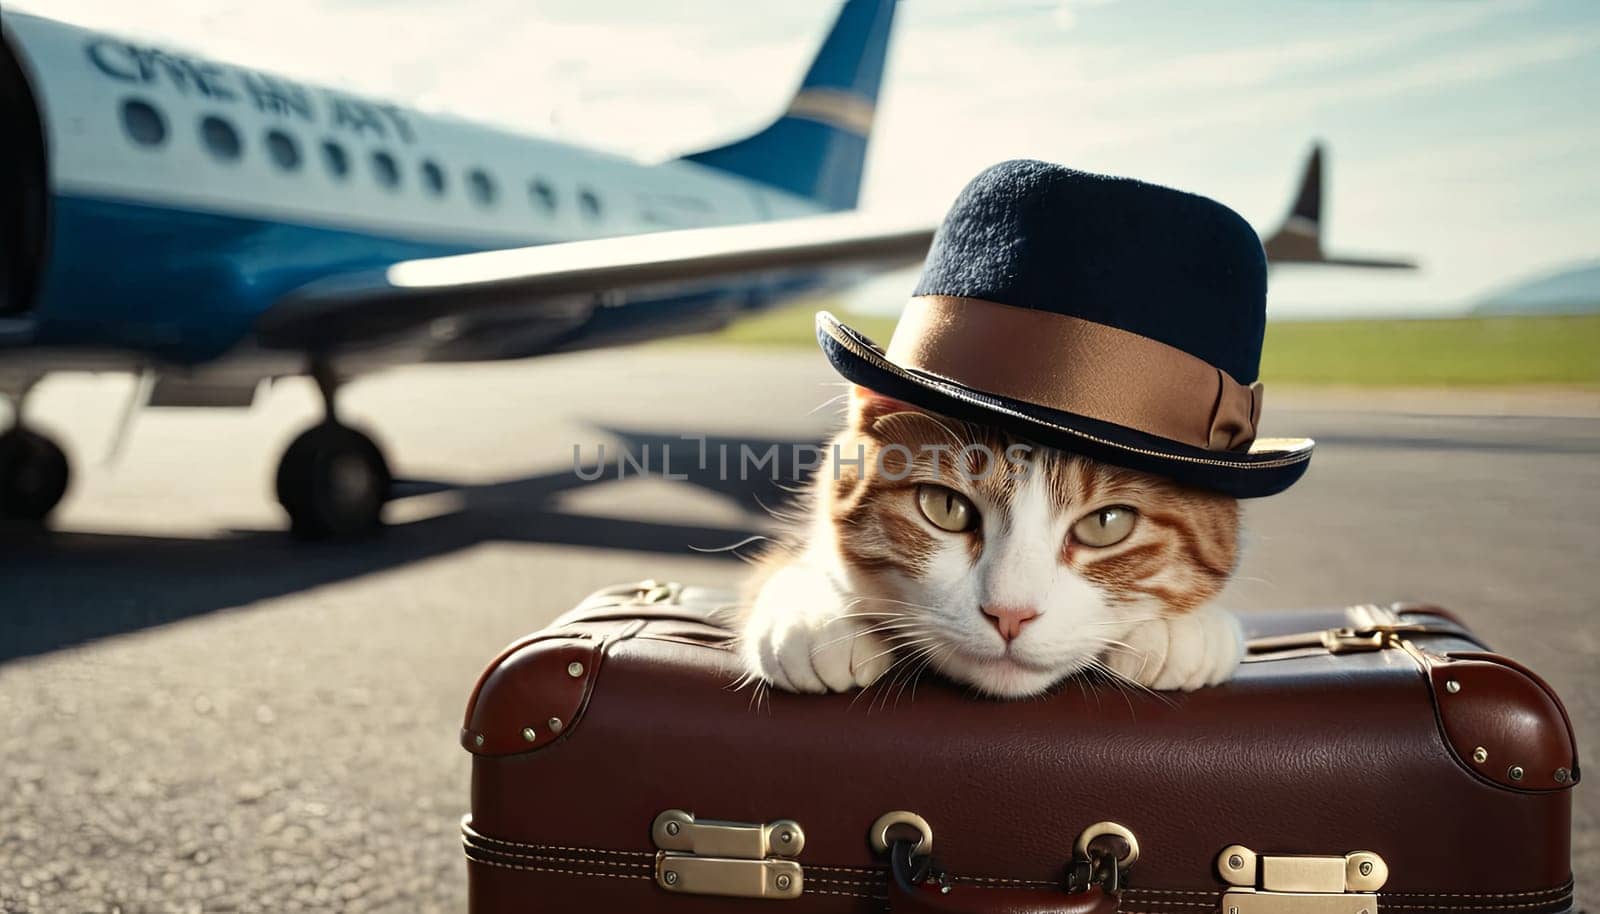 Traveler cat at airport, private jet awaits. Cat adorned with stylish hat sits atop suitcase, evoking sense of companionship in travel